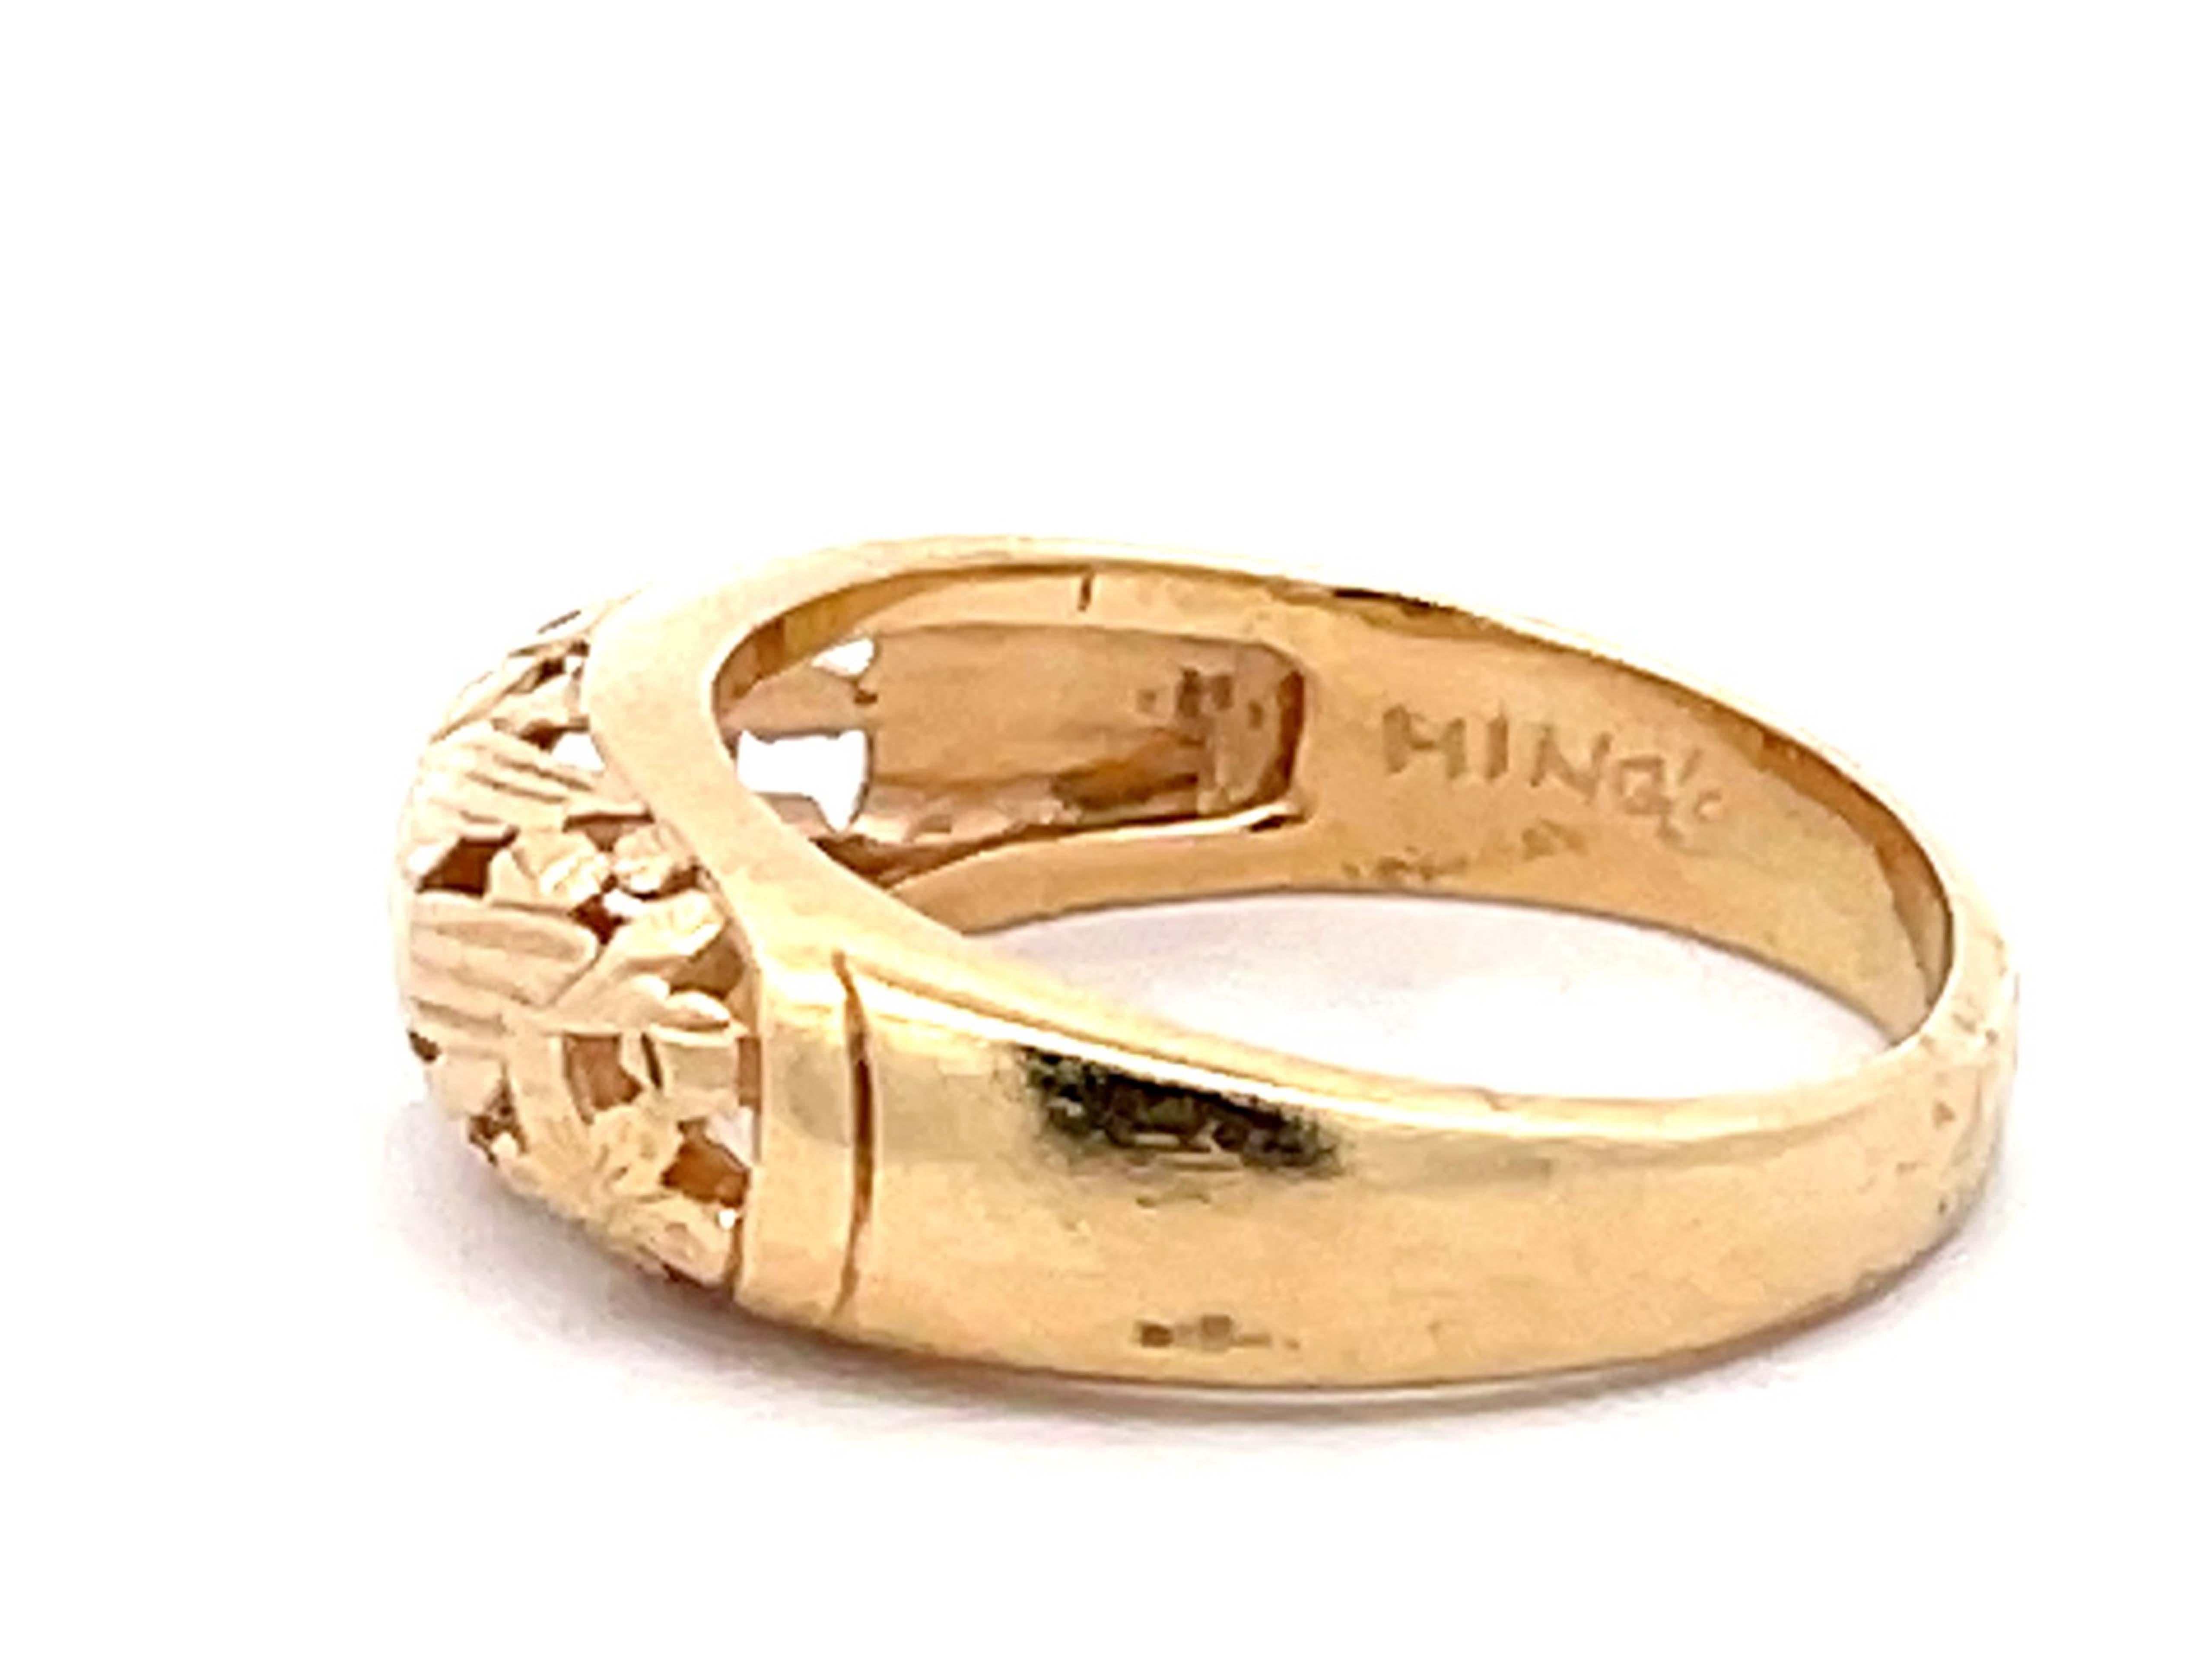 Mings Bird on a Plum Cutout Ring in 14k Yellow Gold In Excellent Condition For Sale In Honolulu, HI